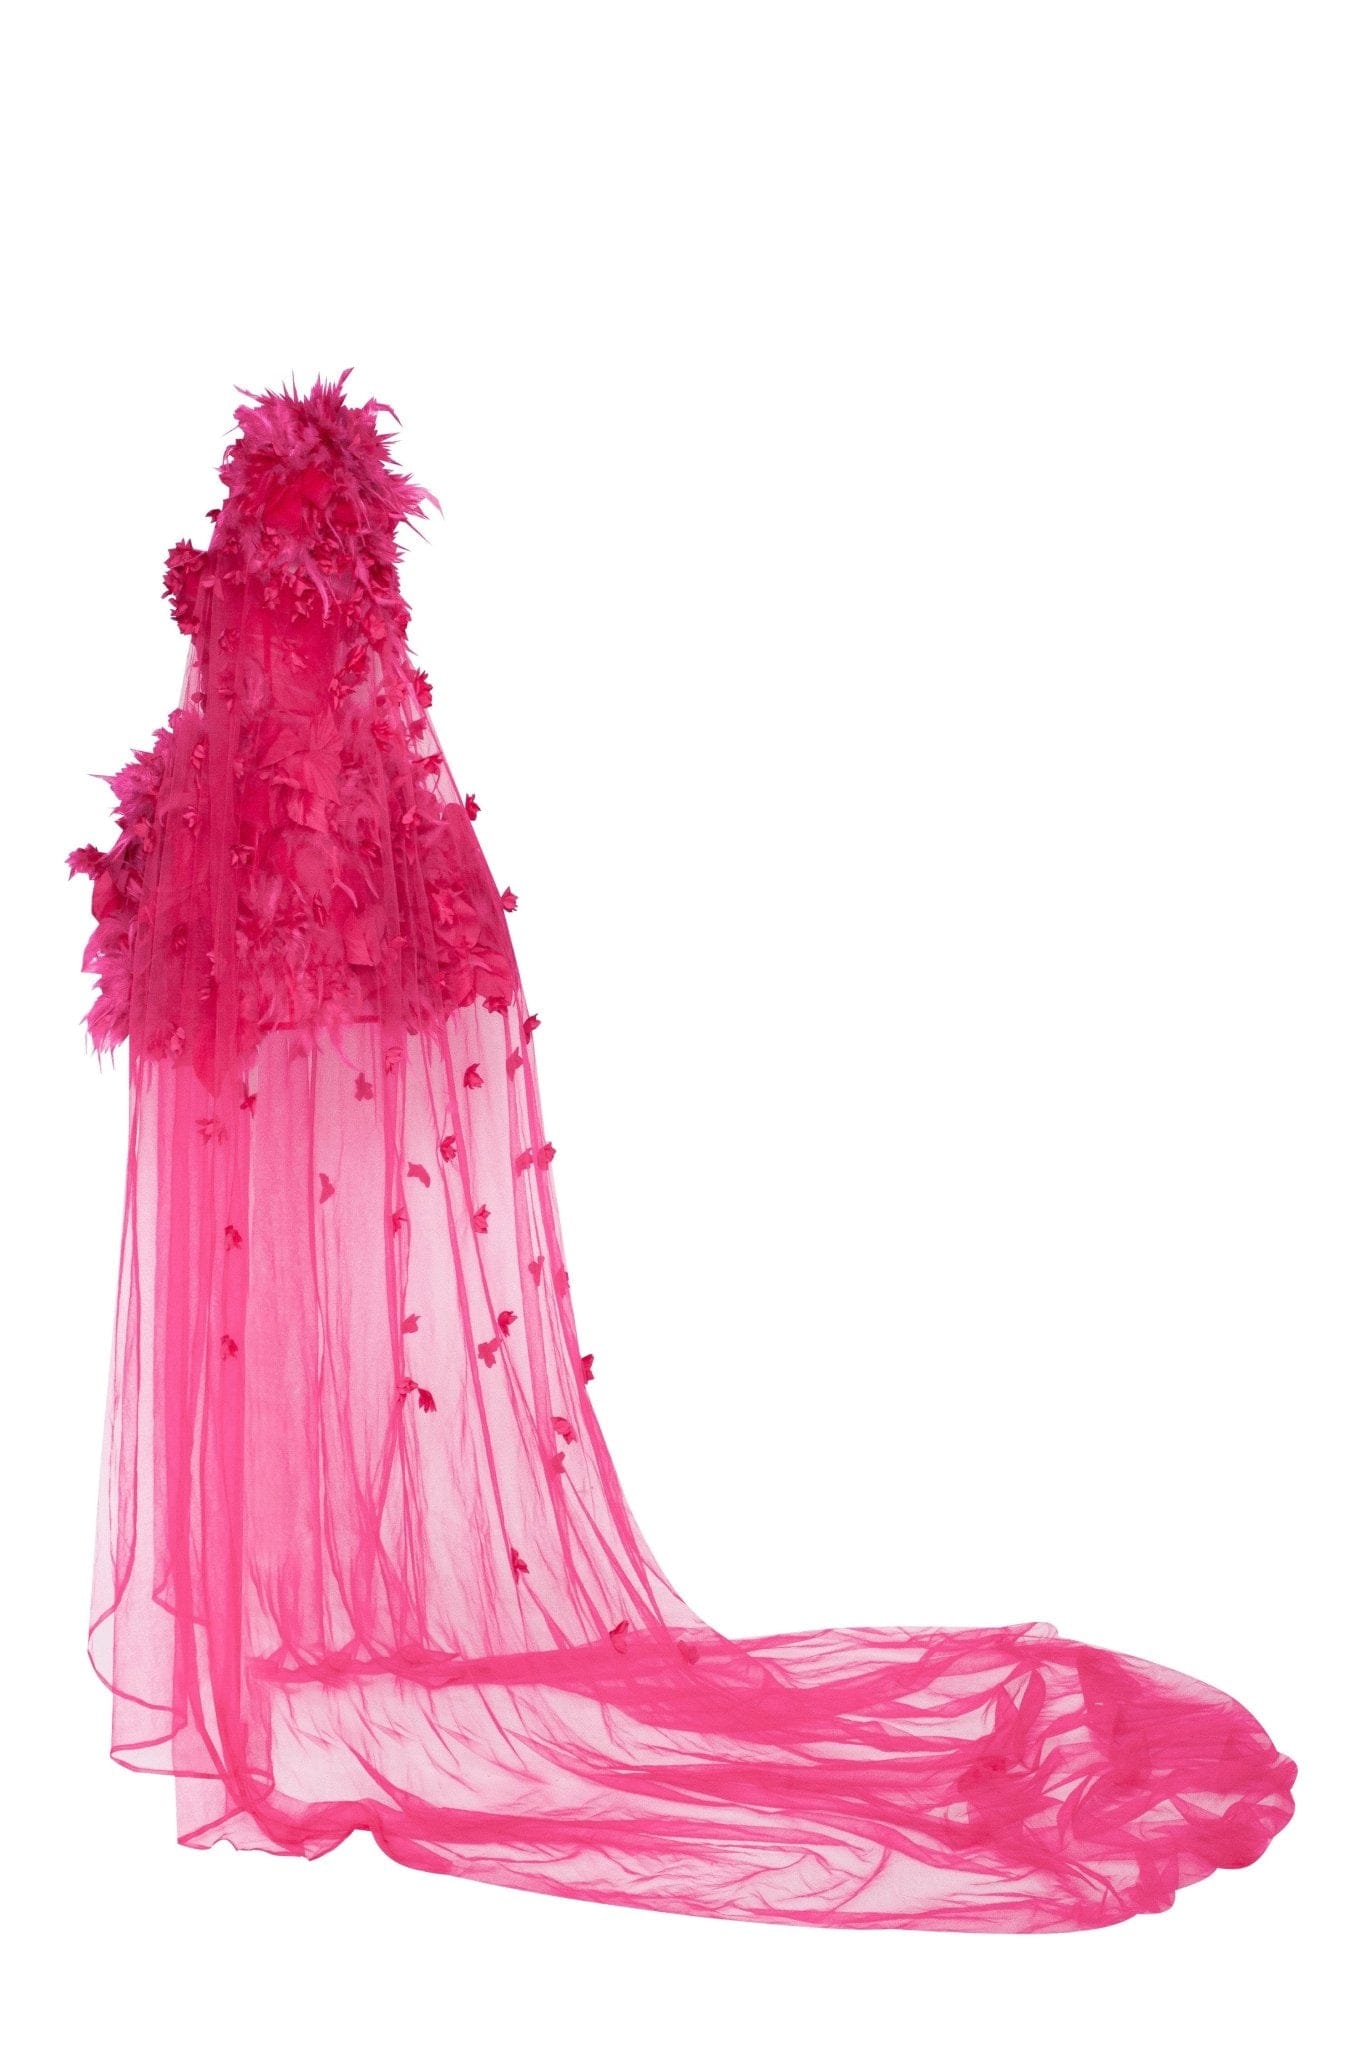 Pink tie-straps tulle dress ➤➤ Milla Dresses - USA, Worldwide delivery